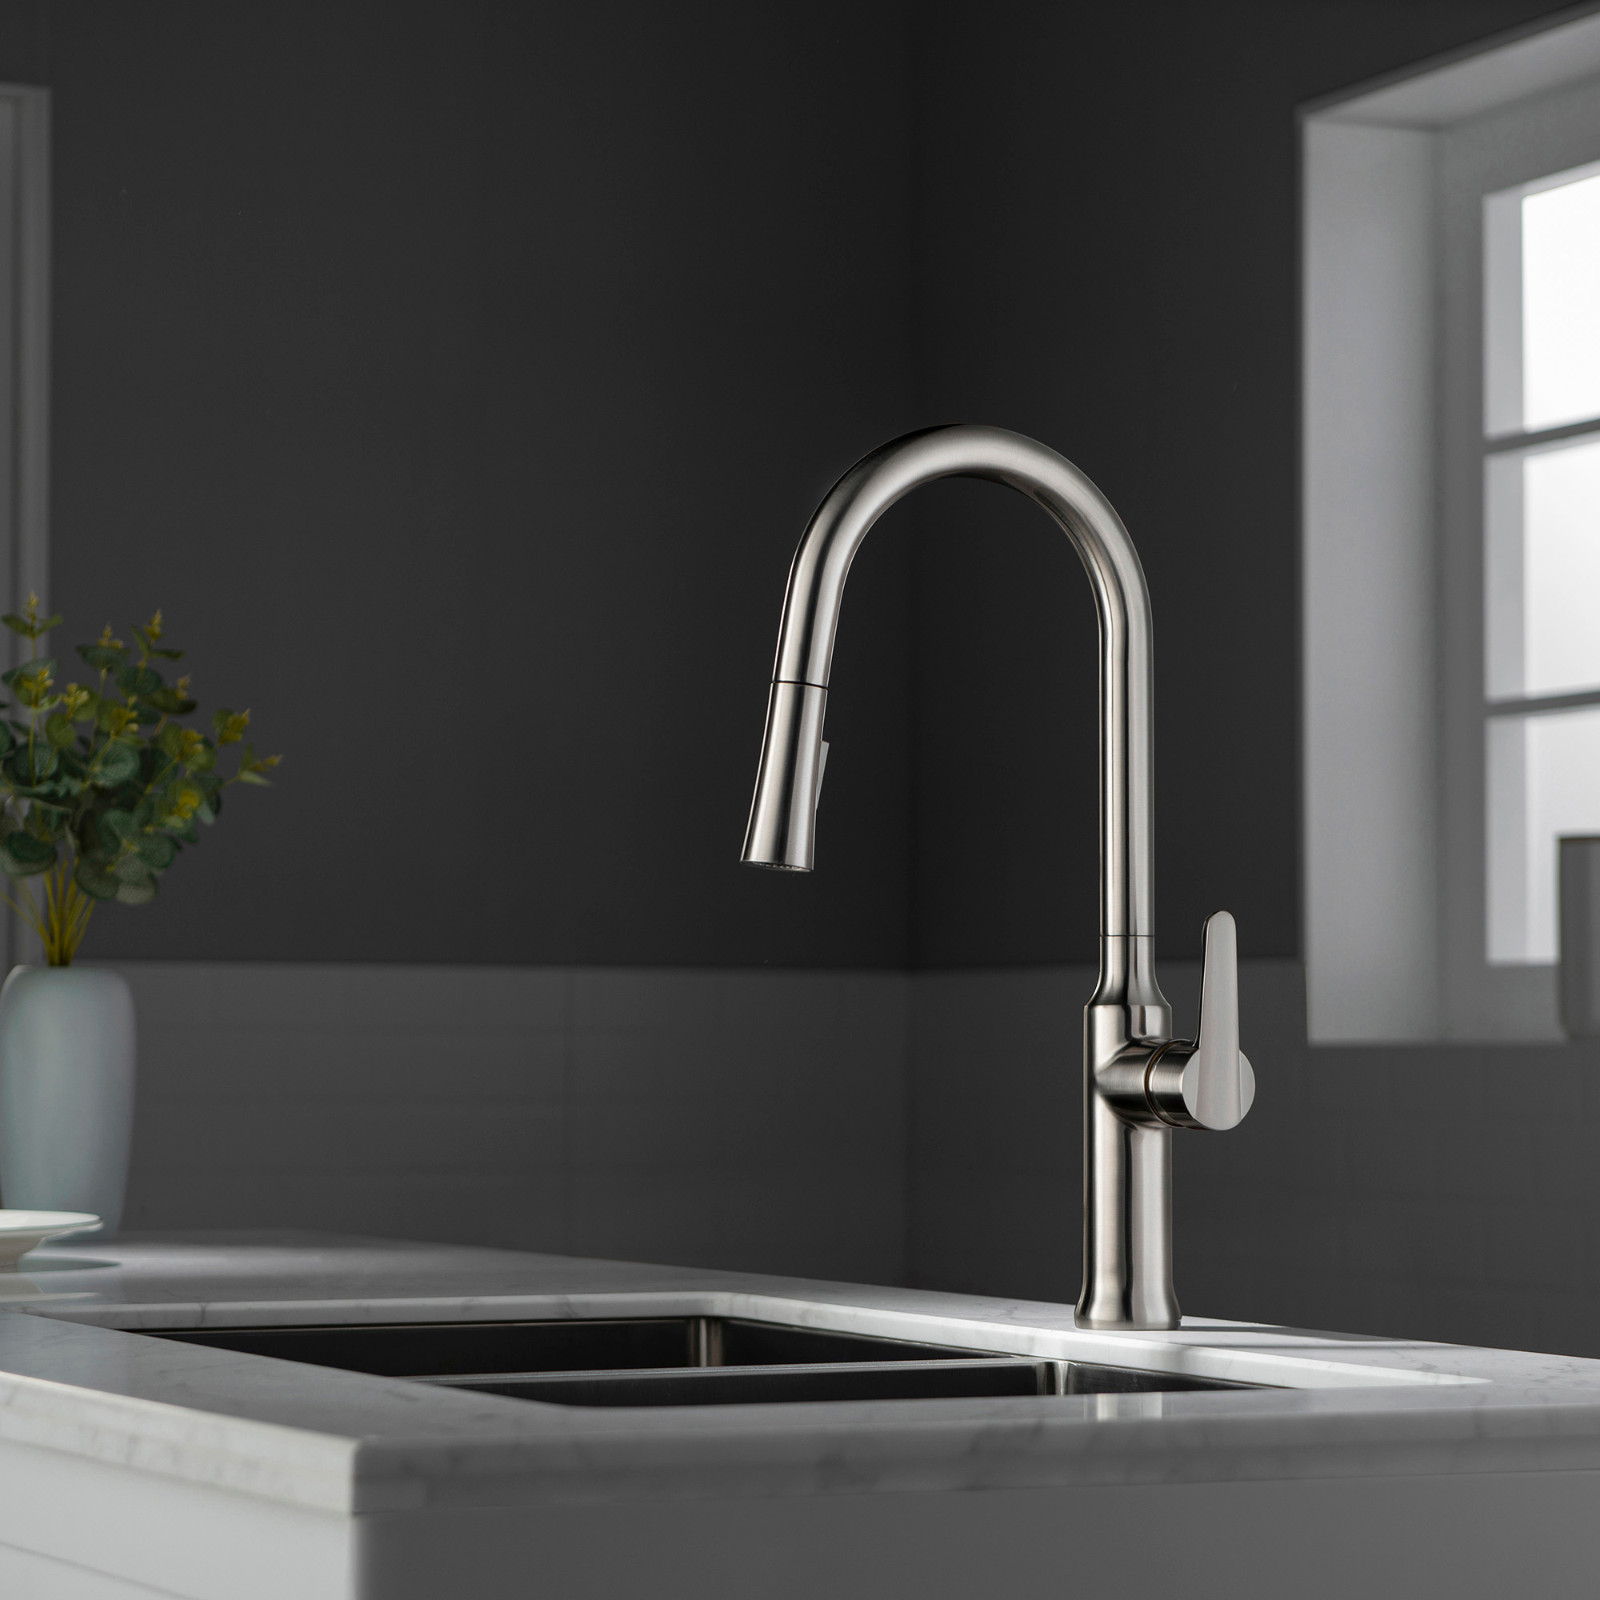  WOODBRIDGE WK030102BN Stainless Steel Single Handle Pre-Rinse Kitchen Faucet with Pull Down Sprayer, Brushed Nickel Finish_9418